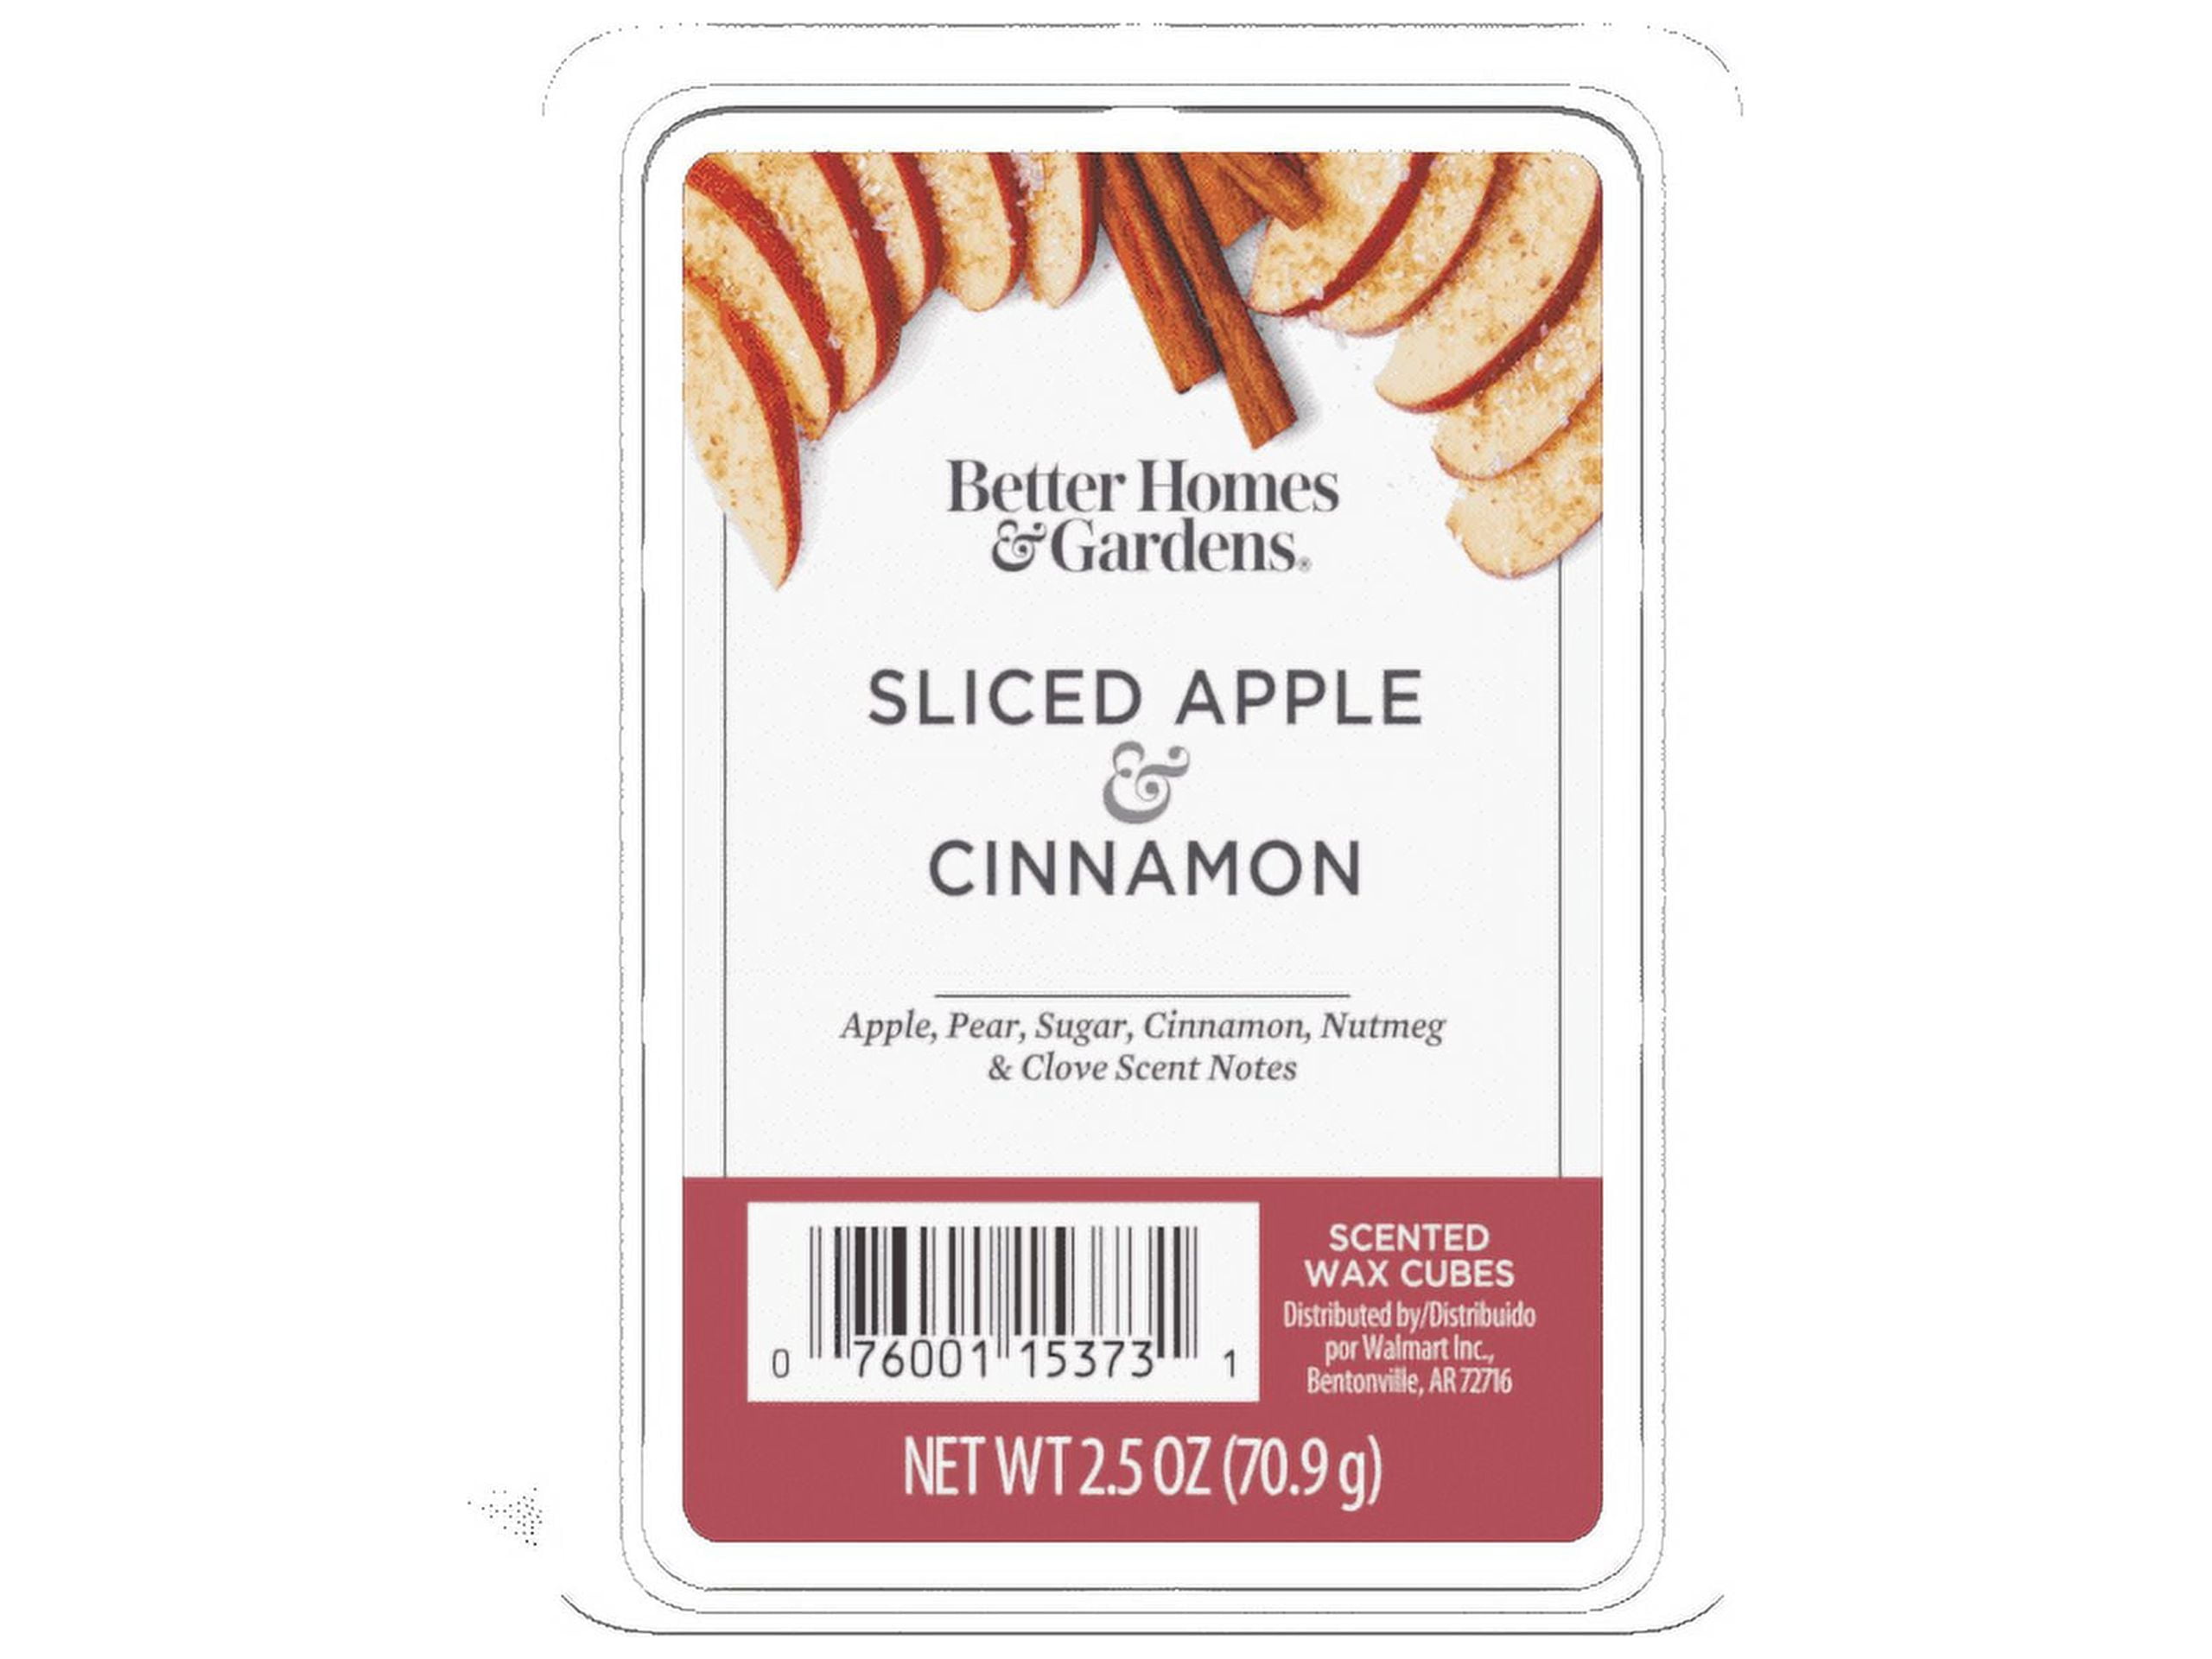 Sliced Apple Cinnamon Scented Wax Melts, Better Homes & Gardens, 2.5 oz  (1-Pack)